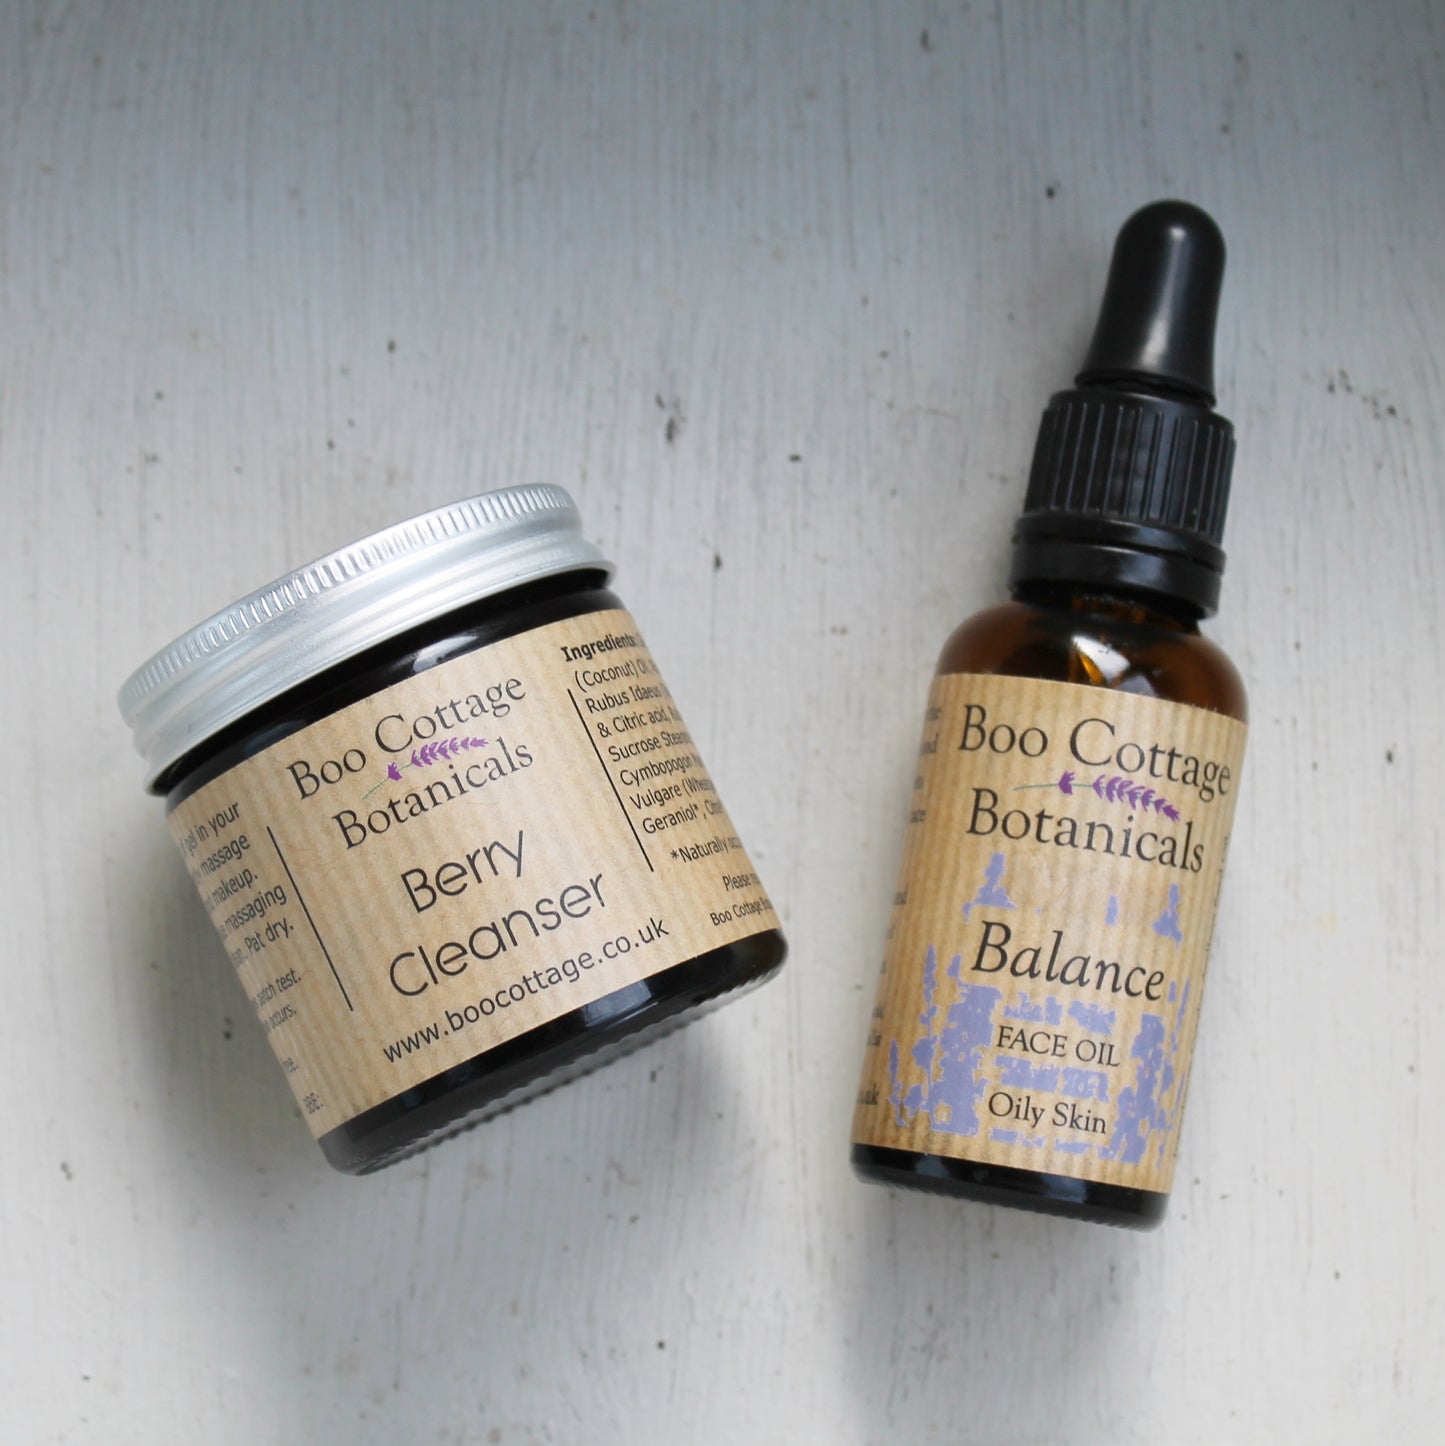 Berry cleanser and Balance face oil in amber jar and bottle on white painted background